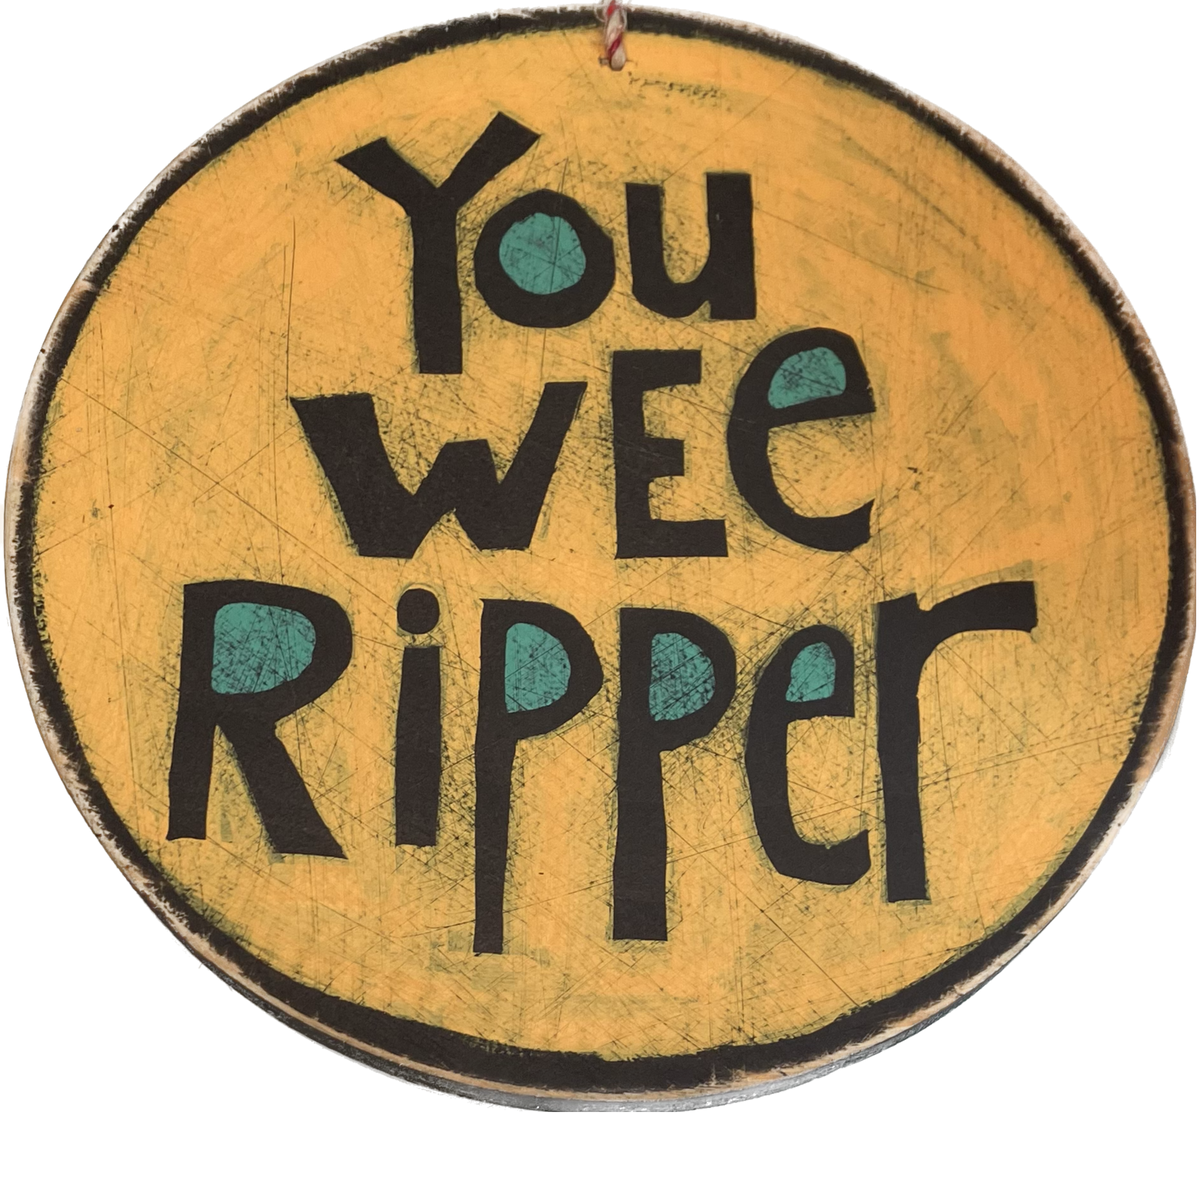 A round piece of wall art saying 'You wee ripper' on a yellow background.